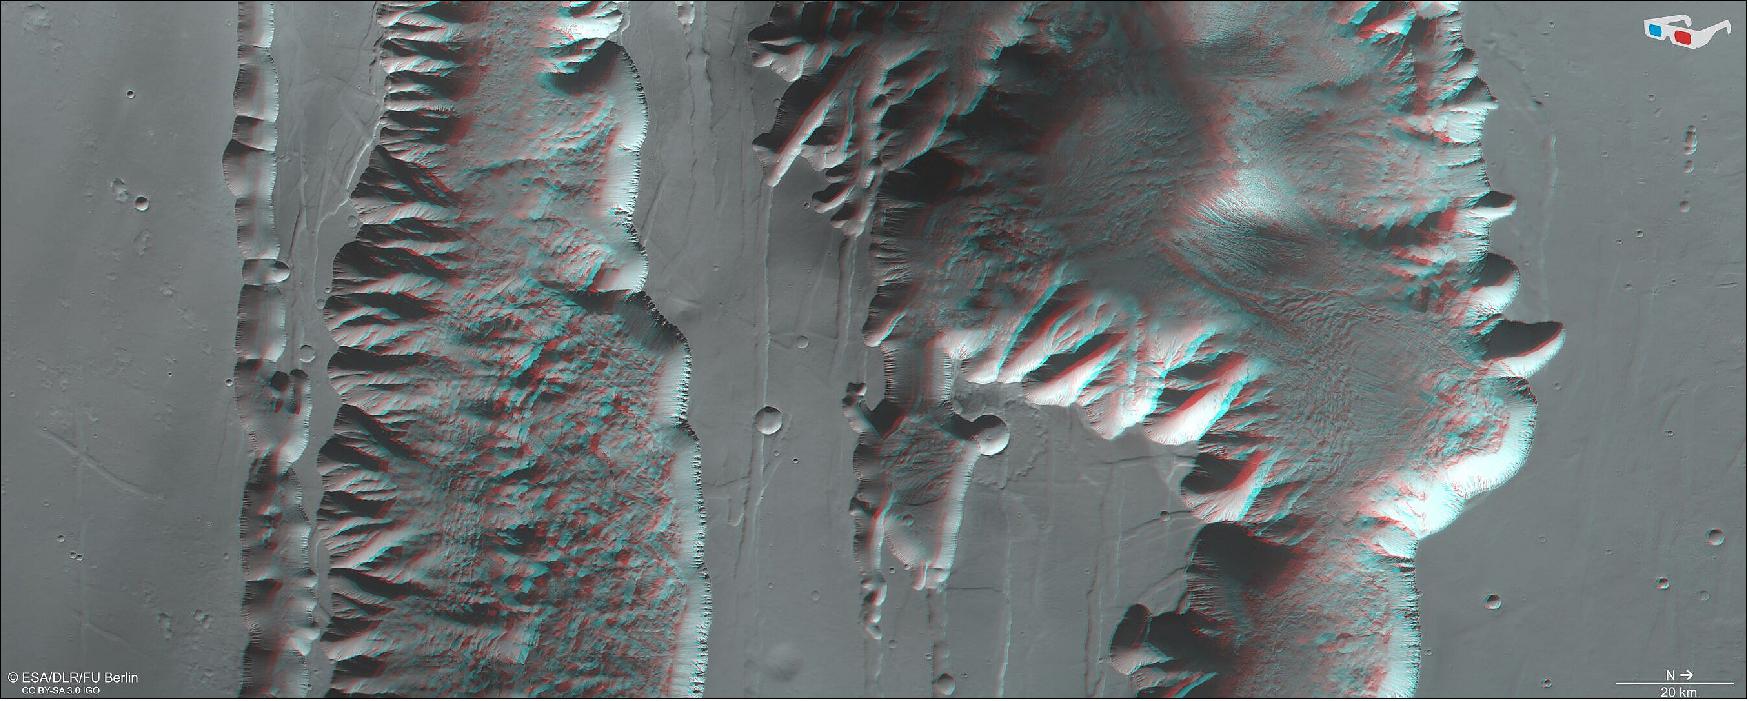 Figure 10: Ius and Tithonium Chasmata in 3D. This stereoscopic image shows Ius and Tithonium Chasmata, which form part of Mars’ Valles Marineris canyon structure. It was generated from data captured by the High Resolution Stereo Camera (HRSC) on ESA’s Mars Express on 21 April 2022 during orbit 23123. The anaglyph, derived from data acquired by the nadir channel and one stereo channel of the HRSC, offers a three-dimensional view when viewed using red-green or red-blue glasses (image credit: ESA/DLR/FU Berlin, CC BY-SA 3.0 IGO)